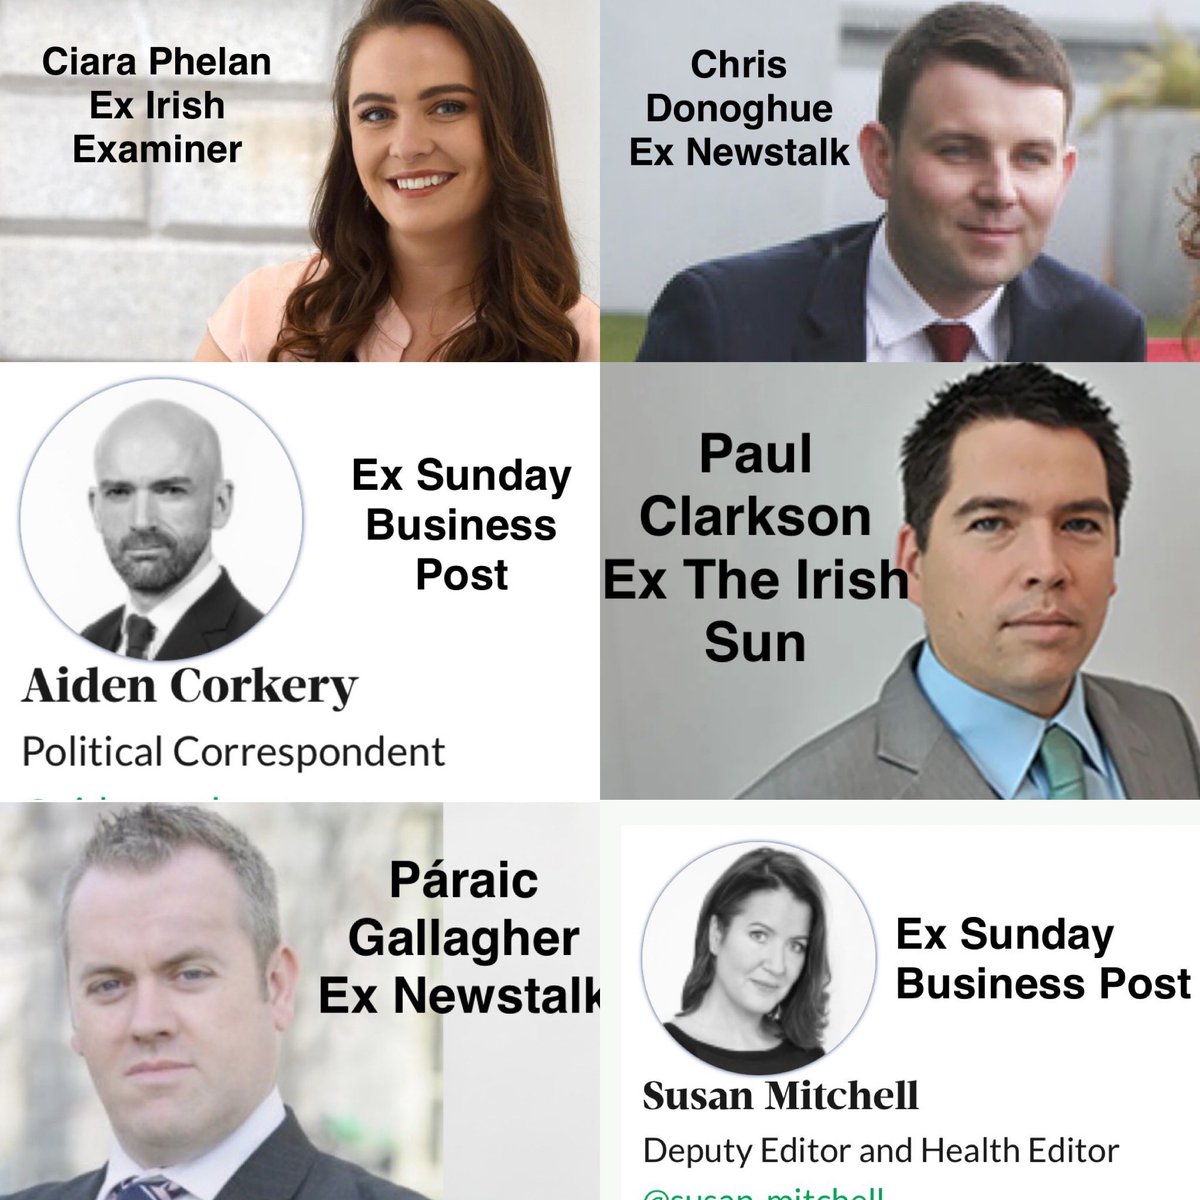 @IrishTimes At least the Irish Times is acknowledging that Irish journalists are leaving for lucrative government advisor roles and this is damaging democracy in Ireland Irish journalists won't report honestly on politics or rock the boat because of the lure of these government jobs 💰